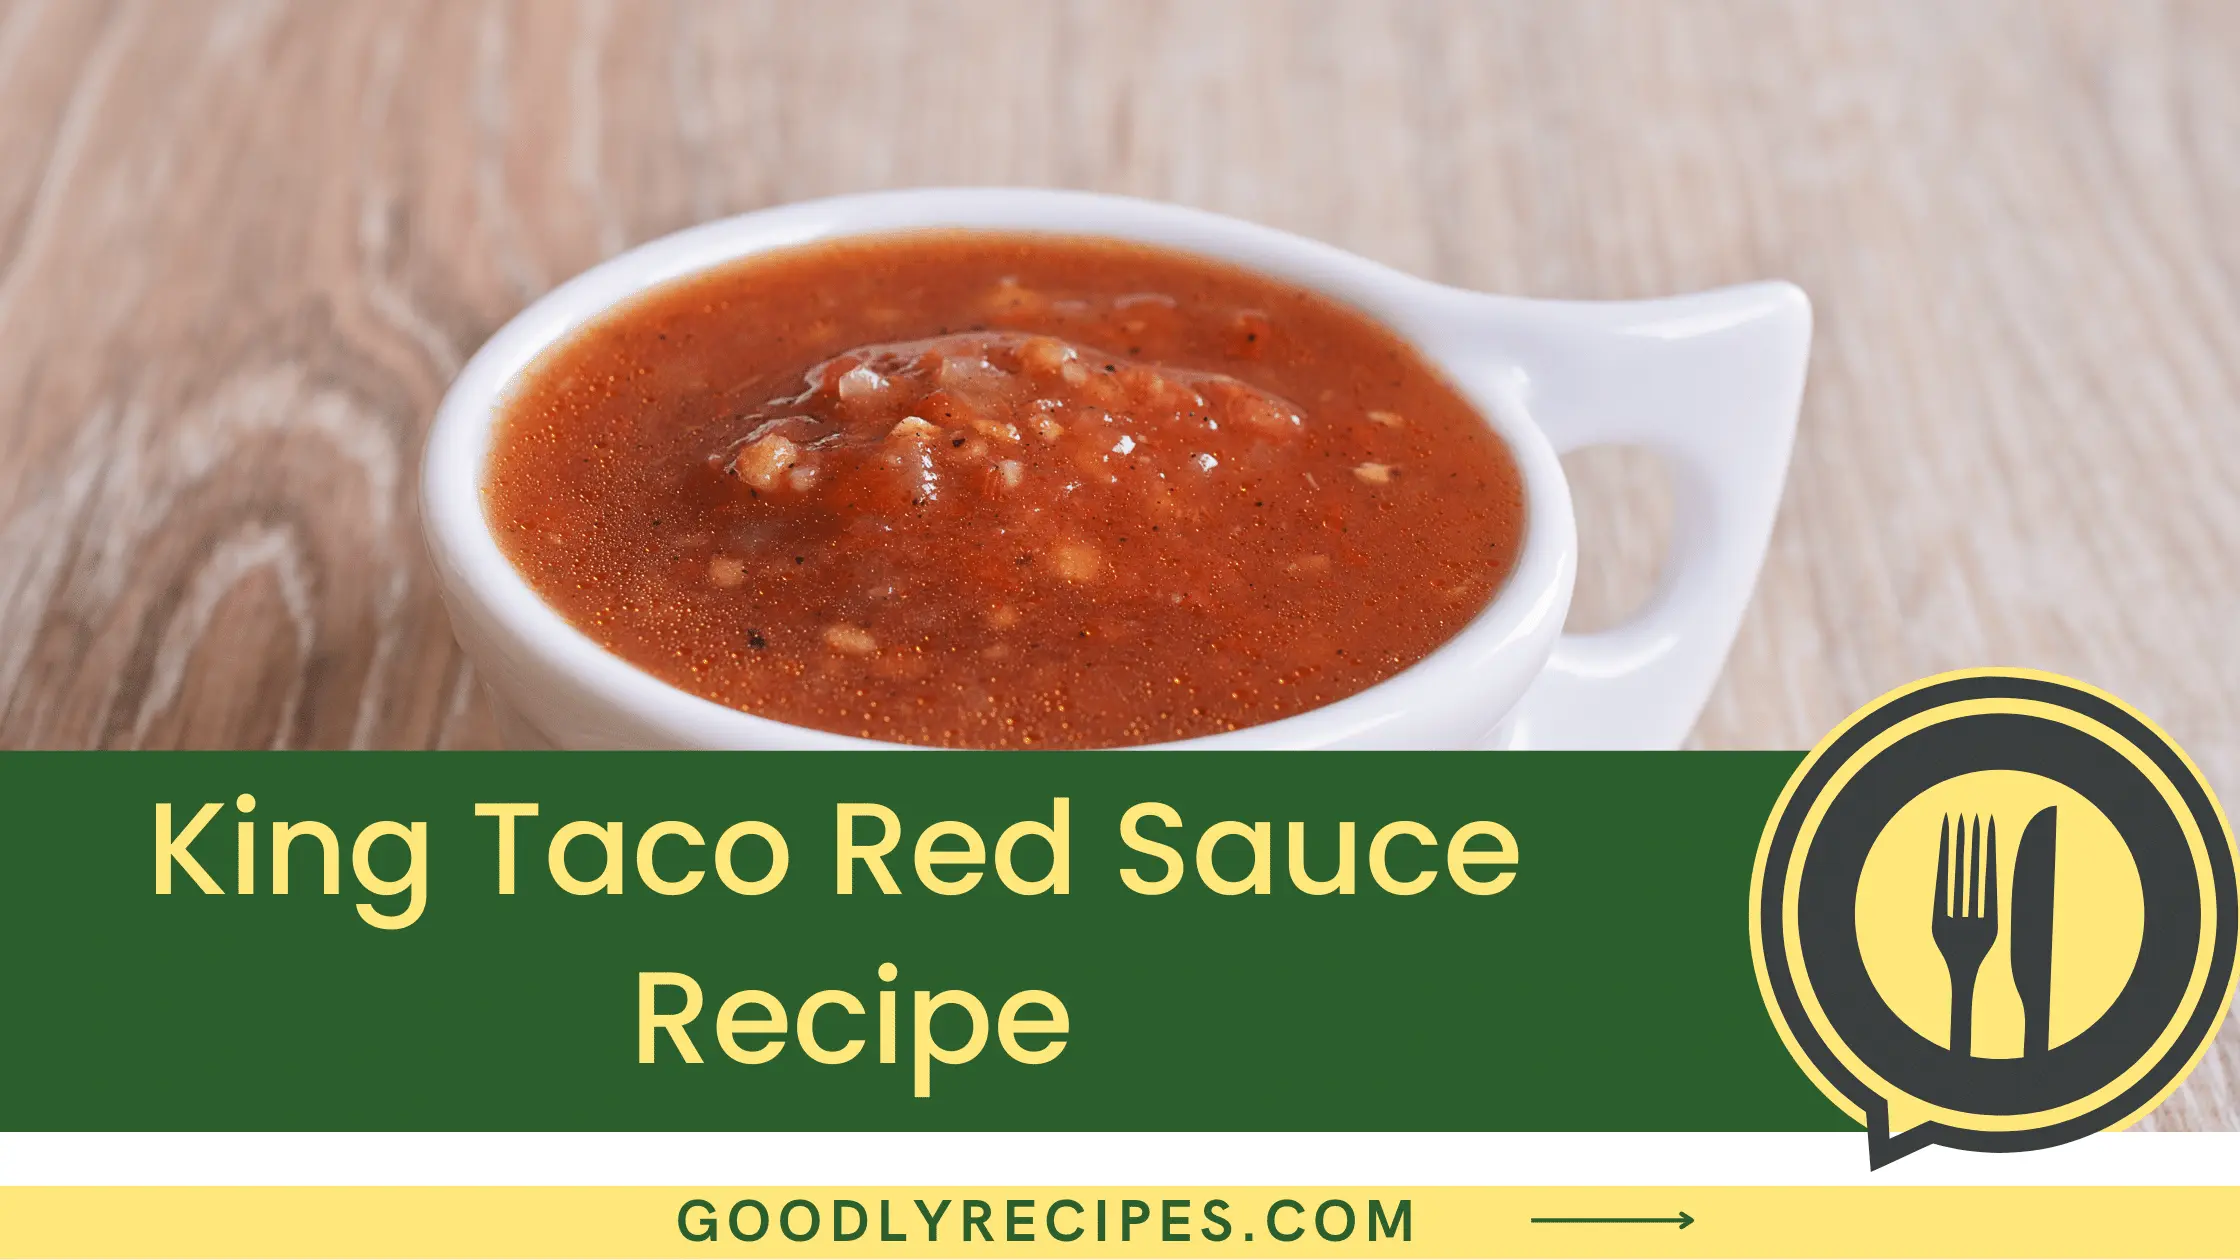 King Taco Red Sauce Recipes - For Food Lovers